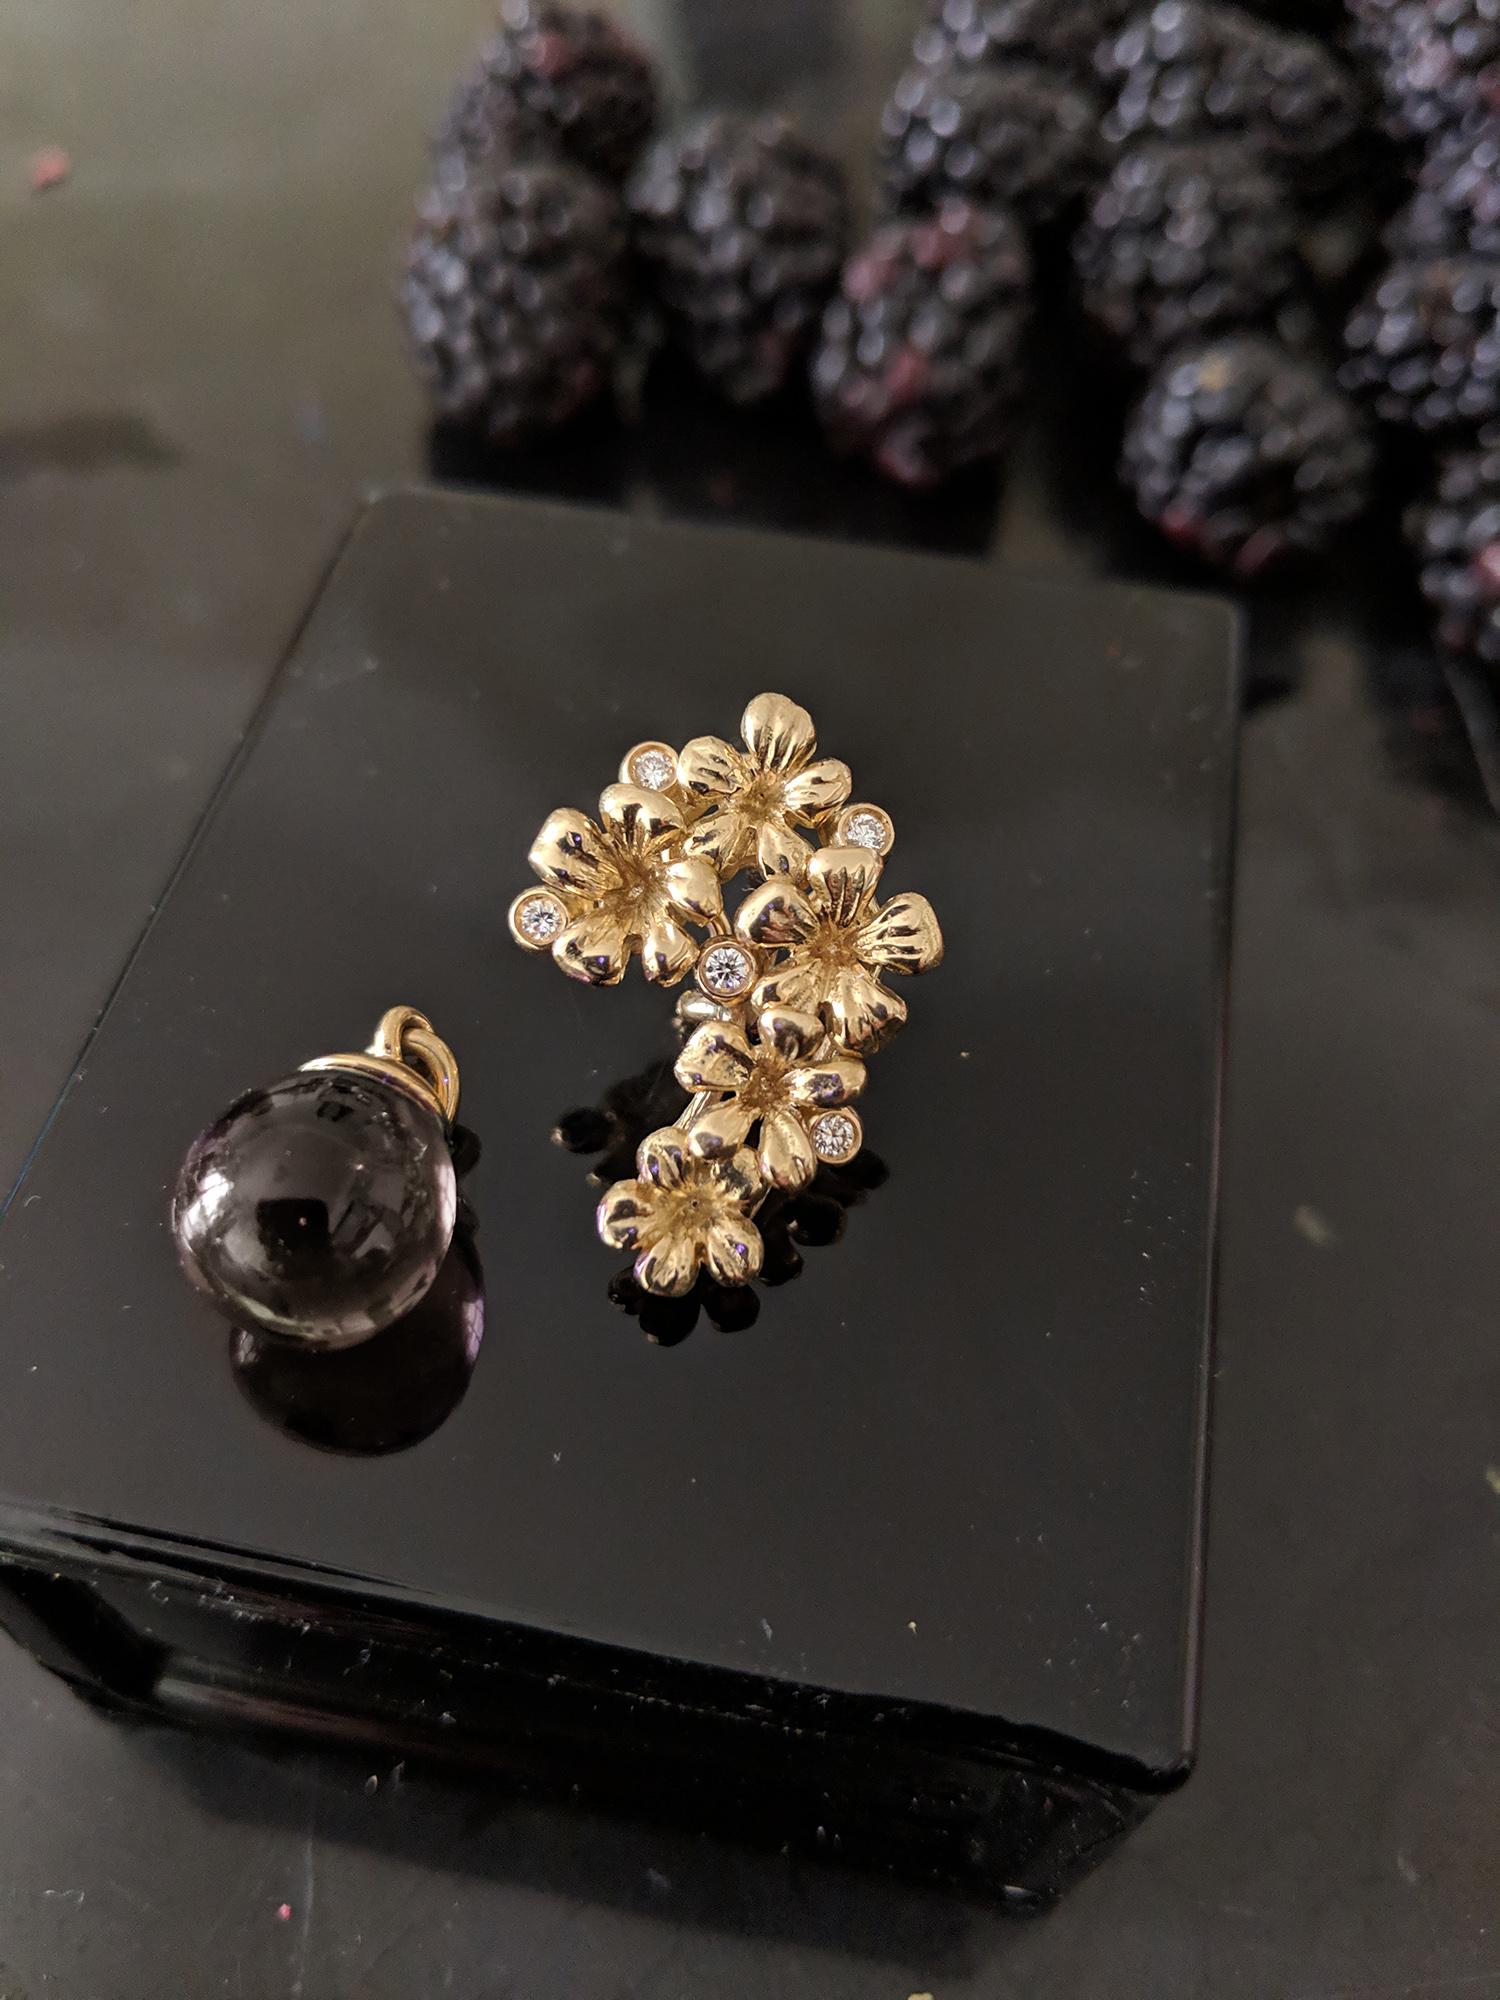 18 karat yellow gold Plum Blossom brooch is encrusted with 5 round diamonds and cabochon smoky quartz drop. This contemporary jewellery collection has been featured in Vogue UA review. We use top natural diamonds VS, F-G, we work with german gems